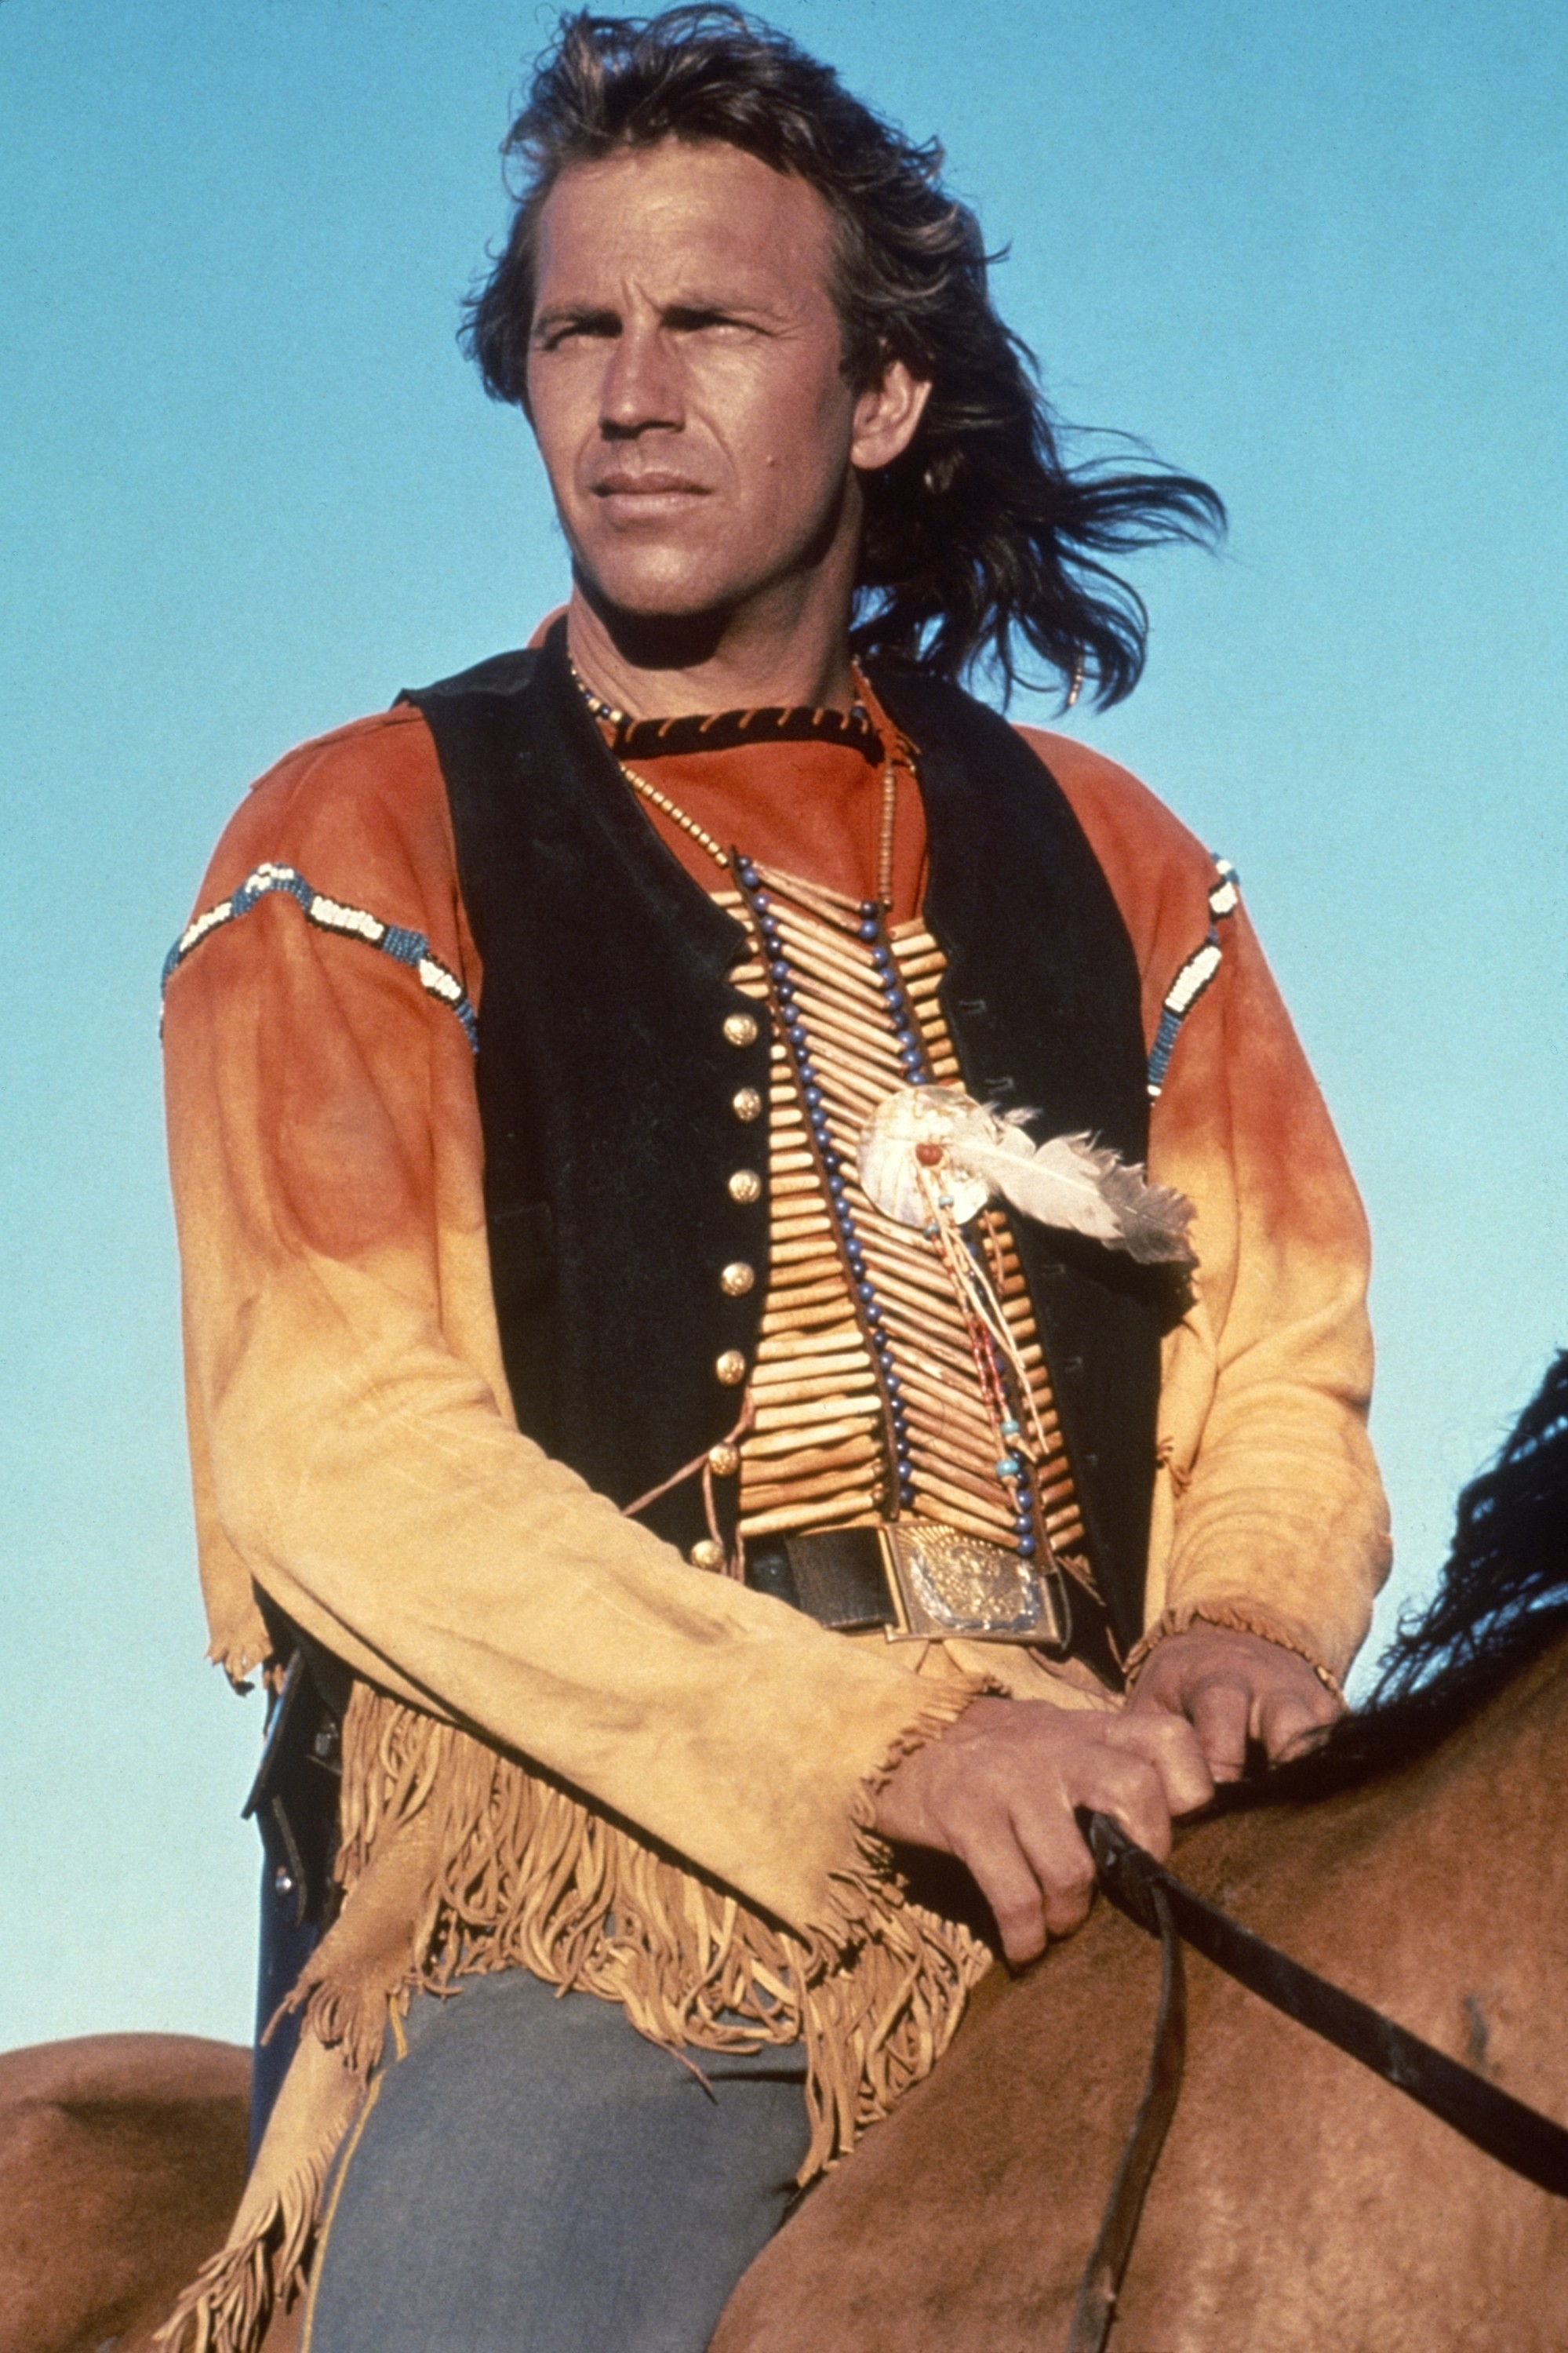 Kevin Costner as Dunbar in historical costume with fringed jacket on a horse, evoking classic Western films